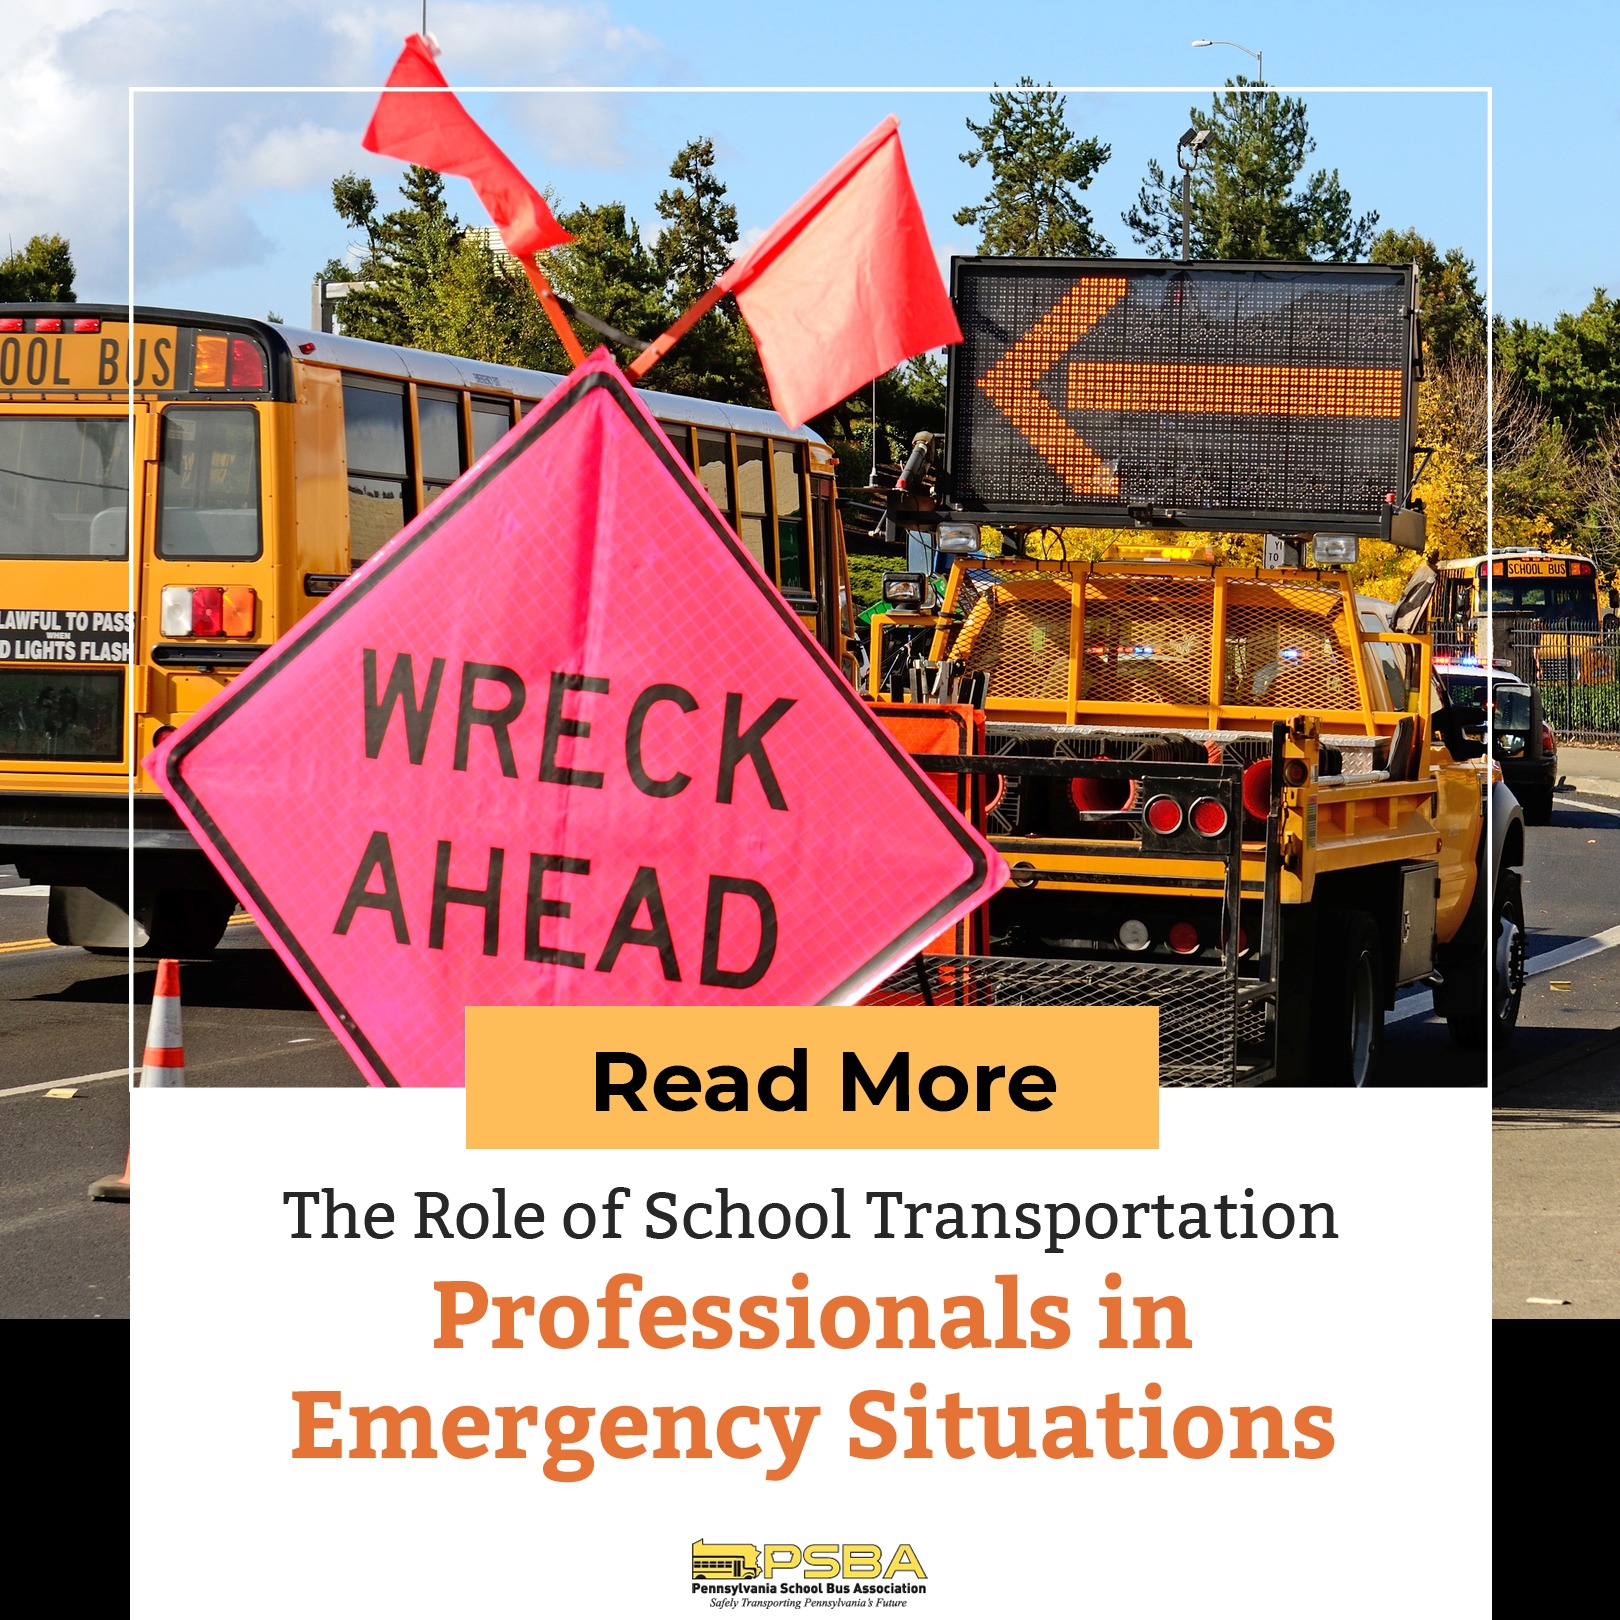 The Role of School Transportation Professionals in Emergency Situations